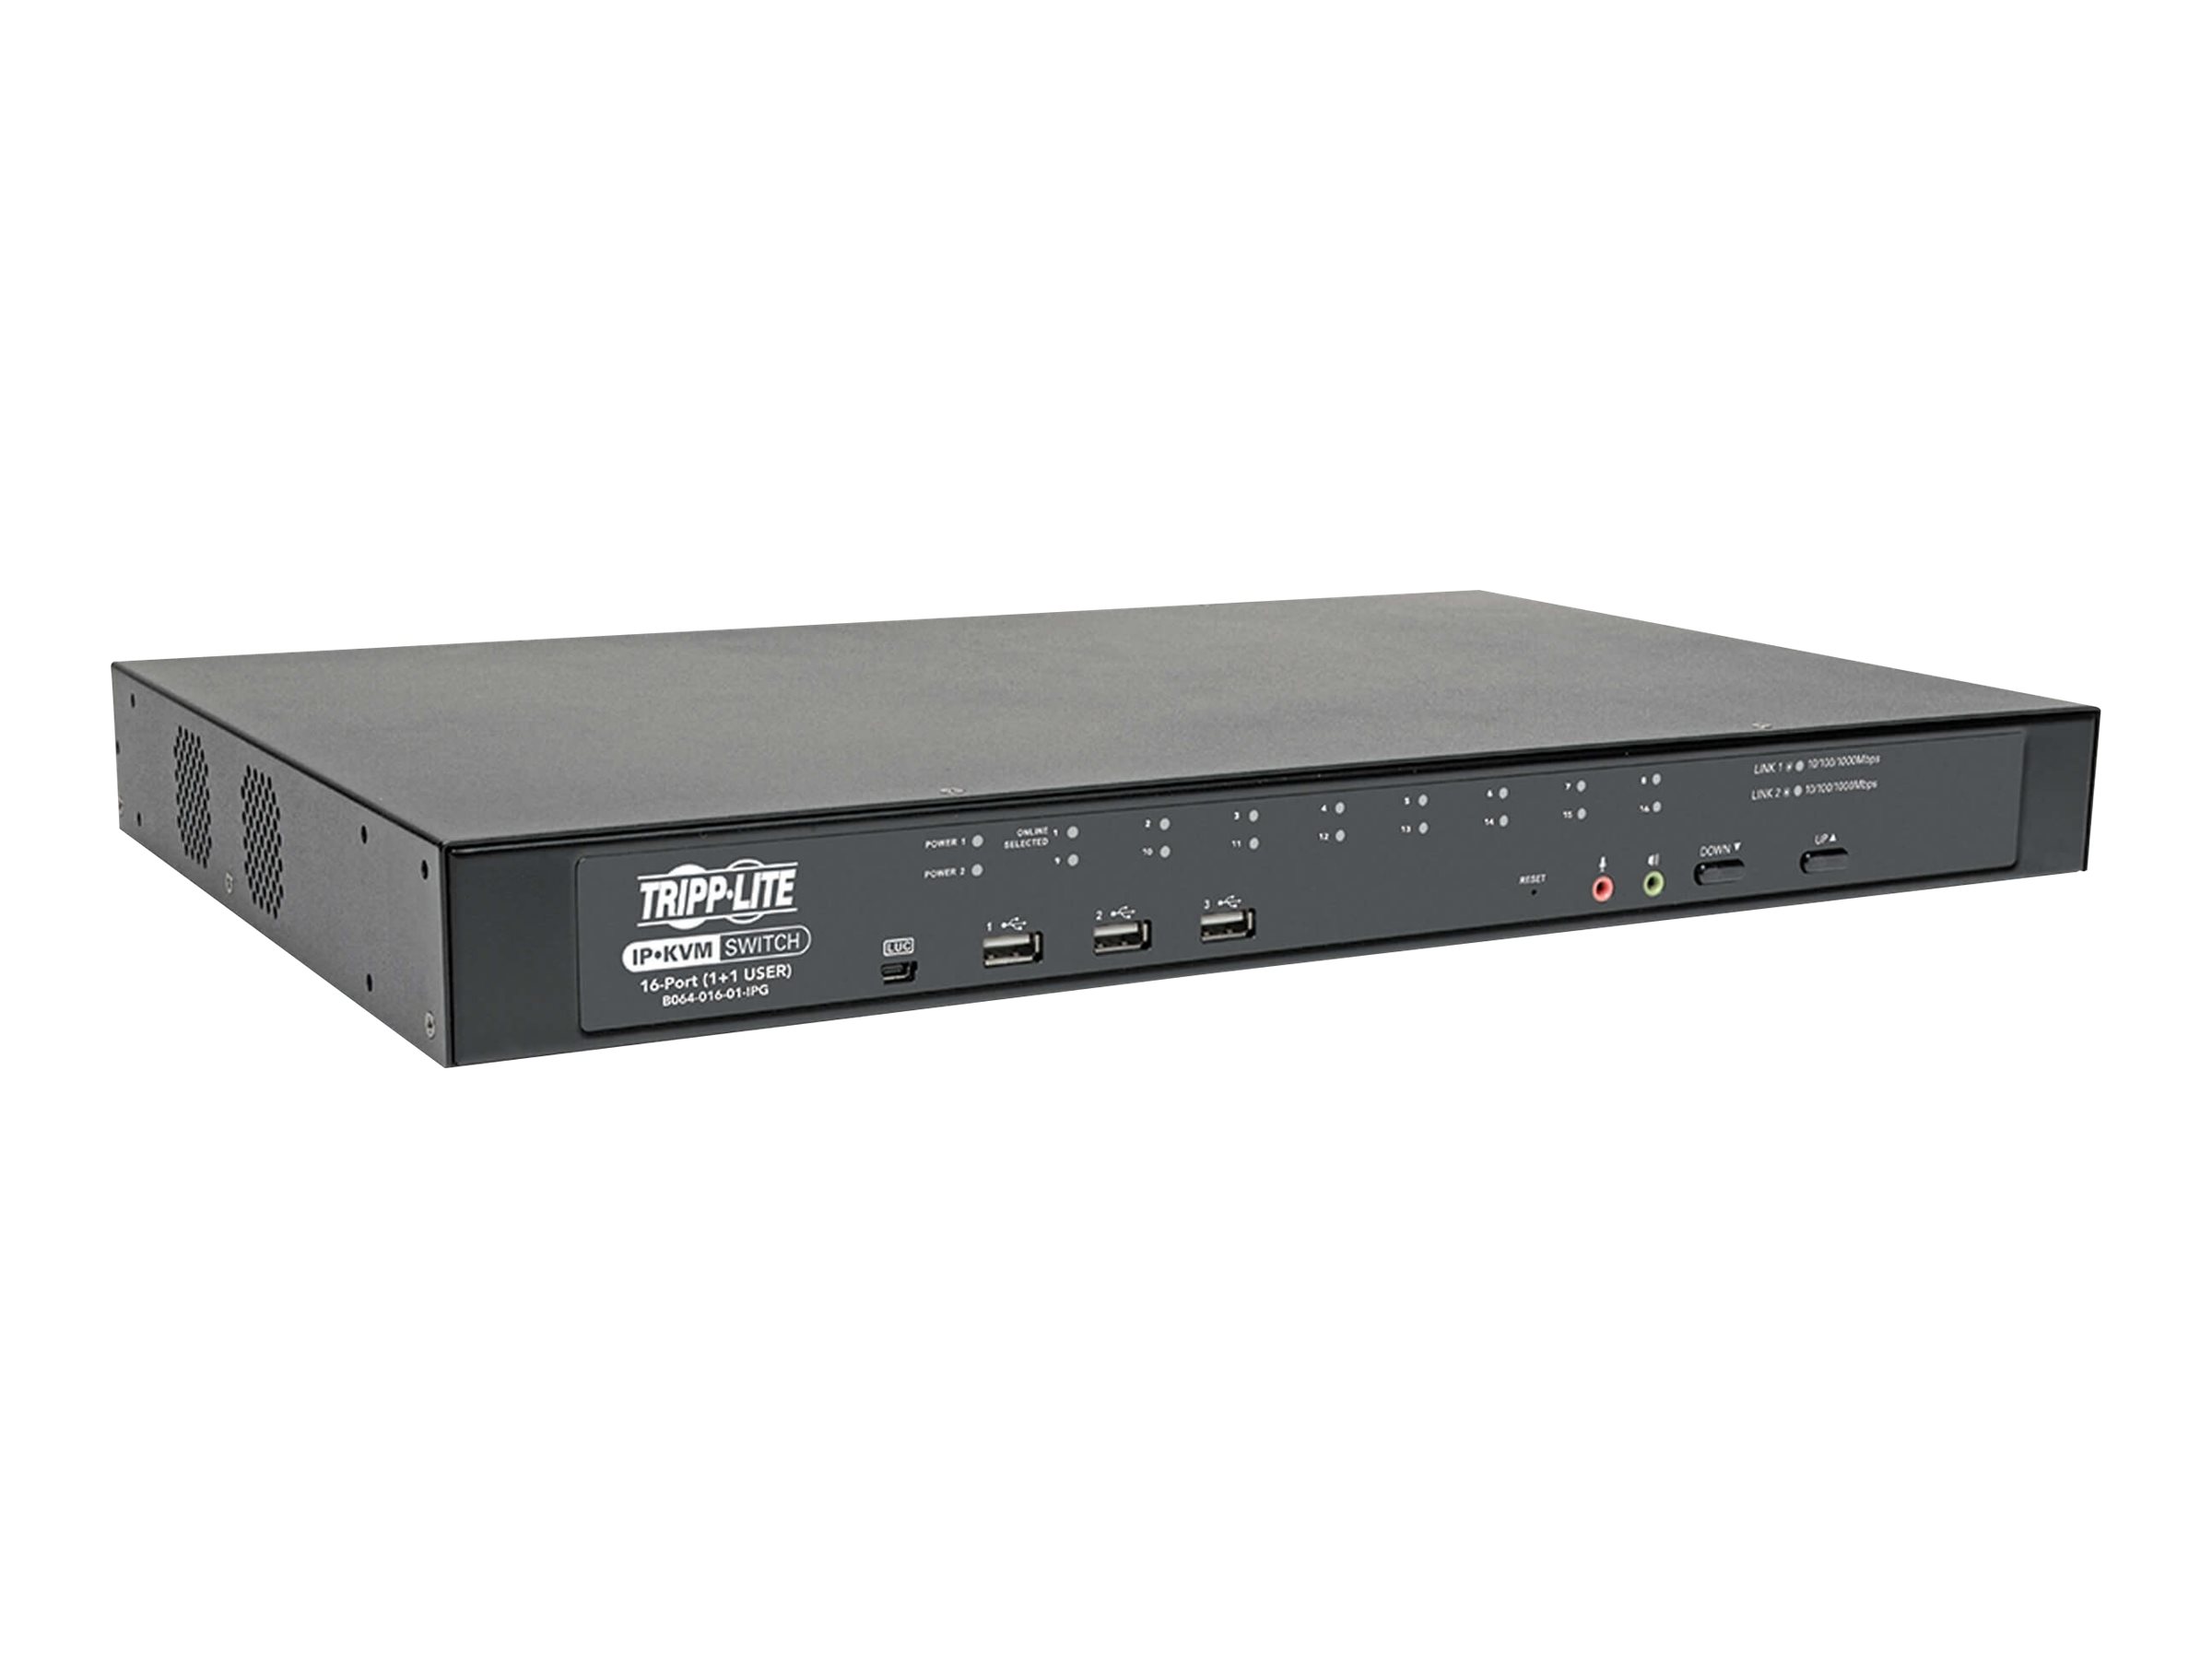 Tripp Lite 16-Port Cat5 KVM over IP Switch with Virtual Media - 1 Local & 1 Remote User, 1U Rack-Mount, TAA - KVM switch - 16 x KVM port(s) - 1 local user - 2 IP users - rack-mountable - government GSA - TAA Compliant - image 1 of 5